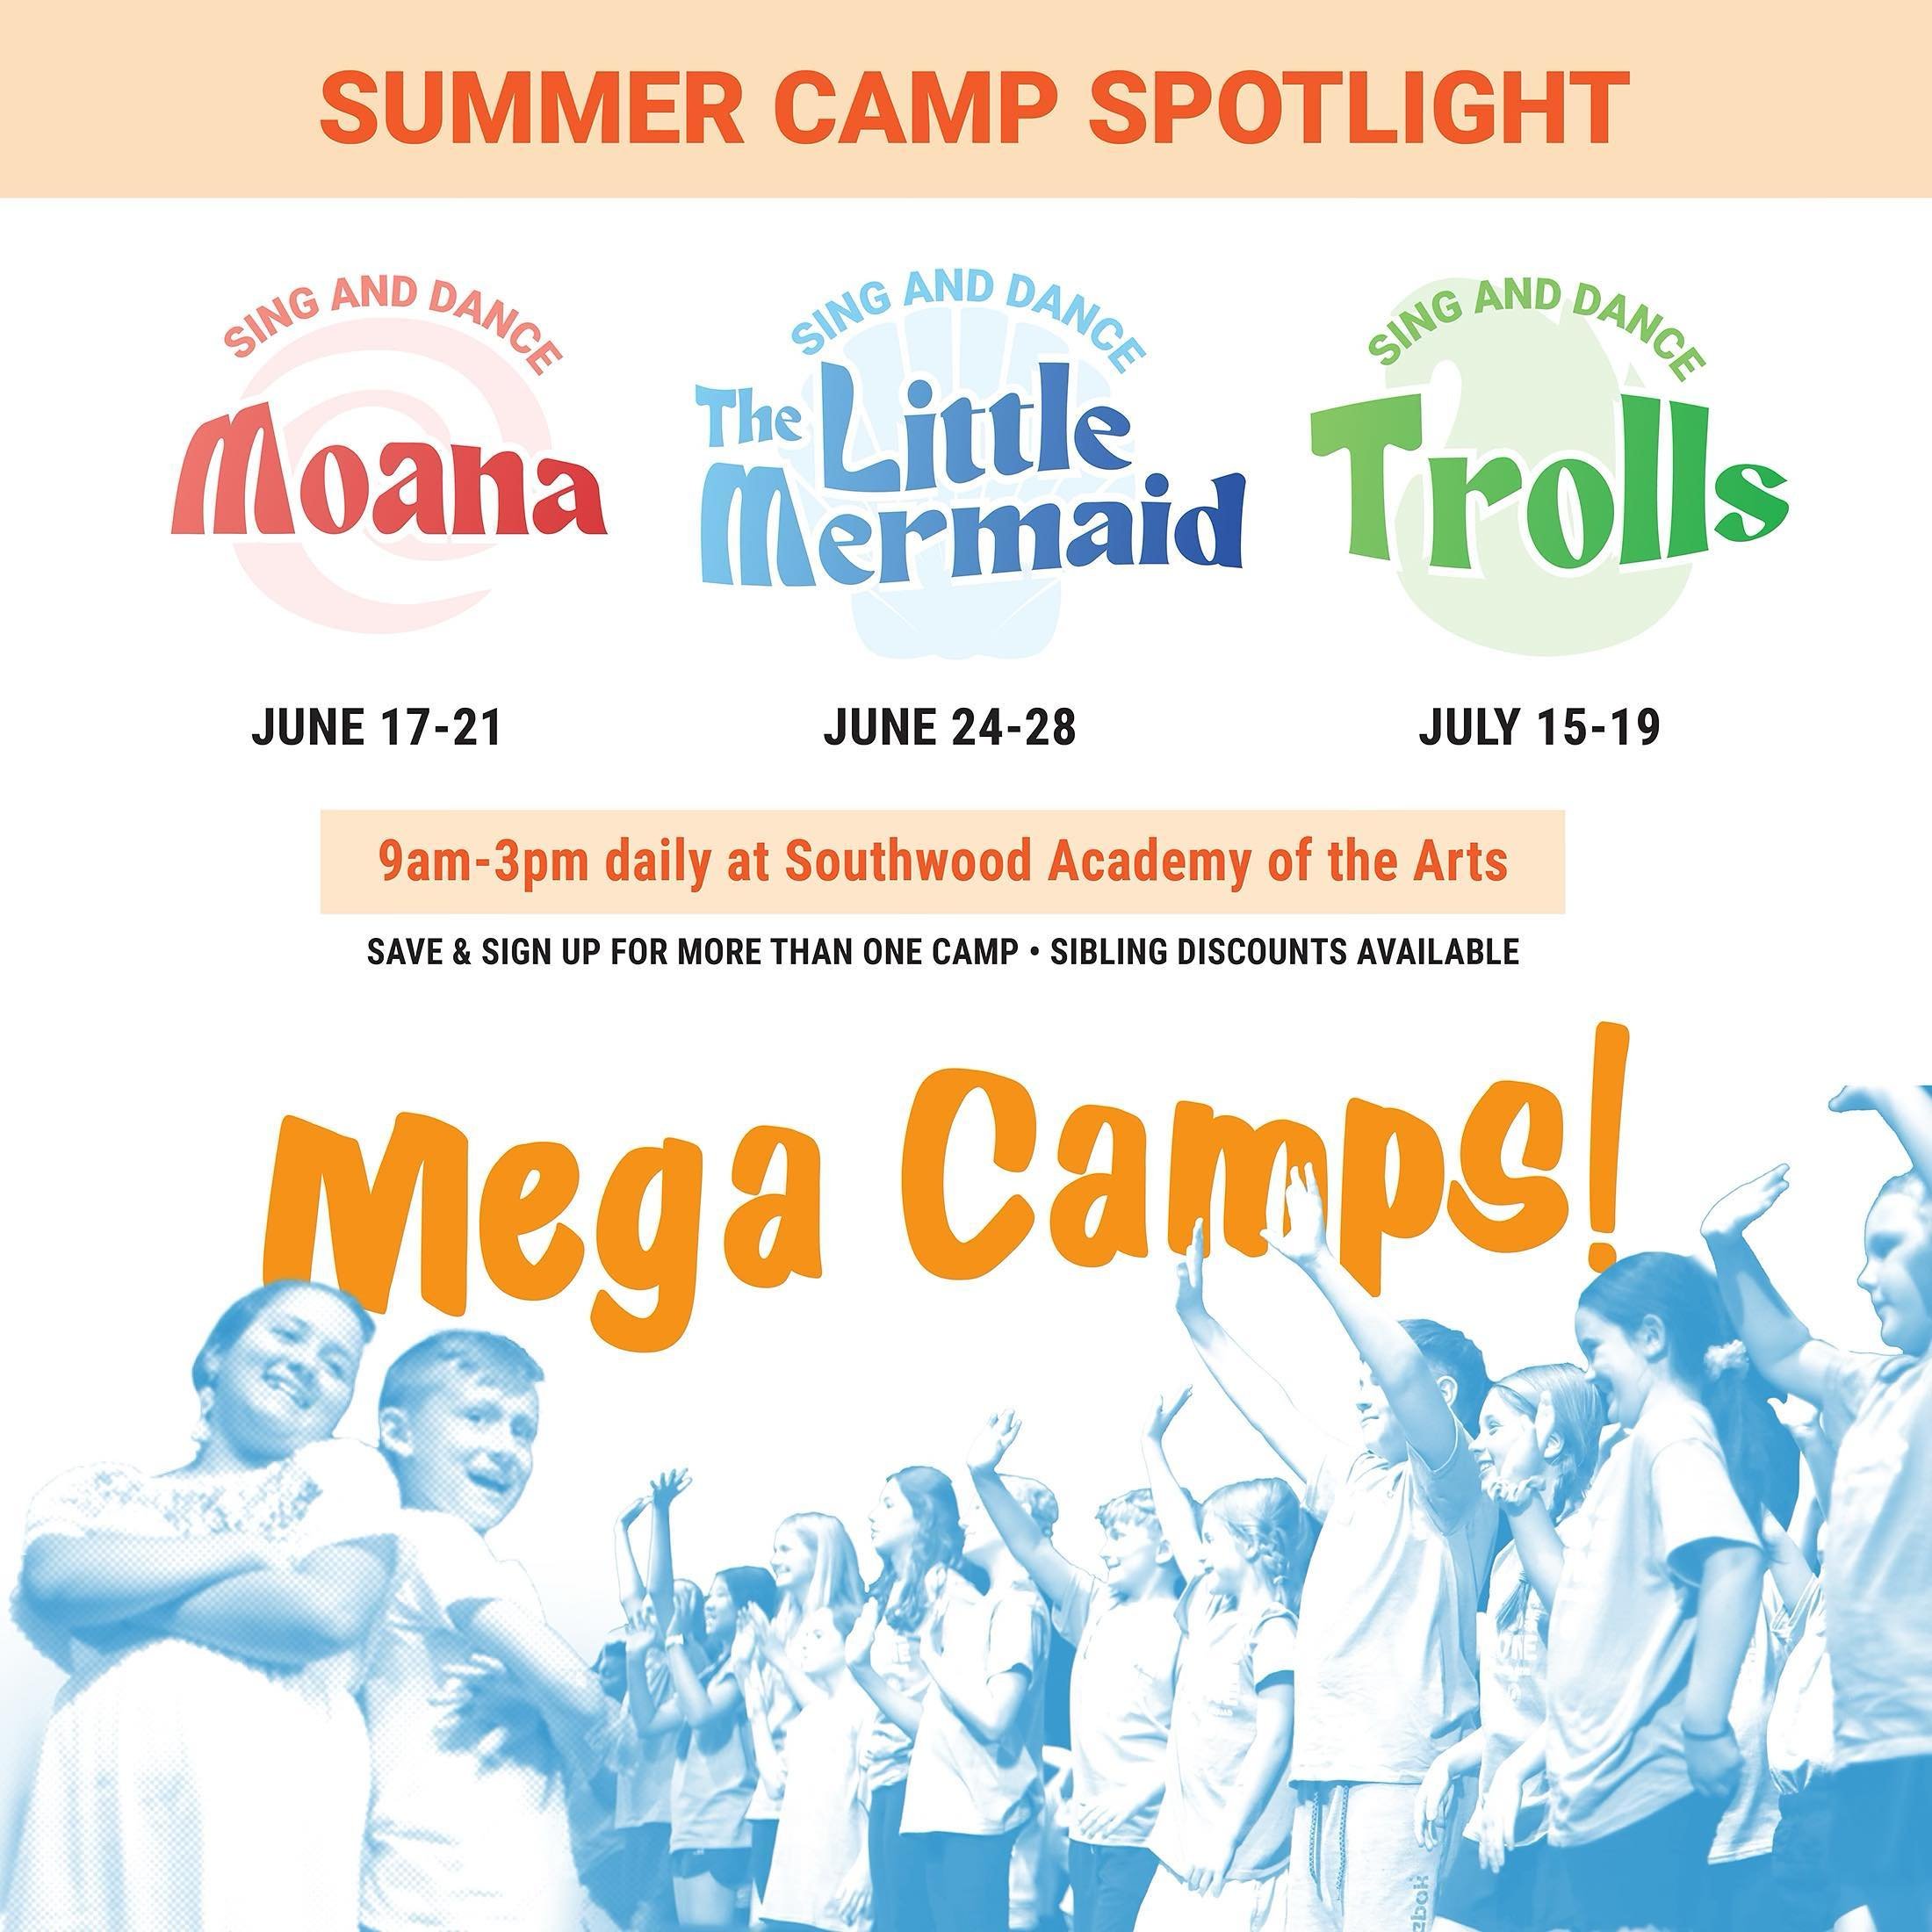 SUMMER CAMP SPOTLIGHT: Mega Camps! 🎭 

Our biggest &amp; most popular camps are back &amp; better than ever&hellip;but enrollment space is running low! Register your 2nd-6th grade student now for a week spent exploring songs &amp; dance from their f